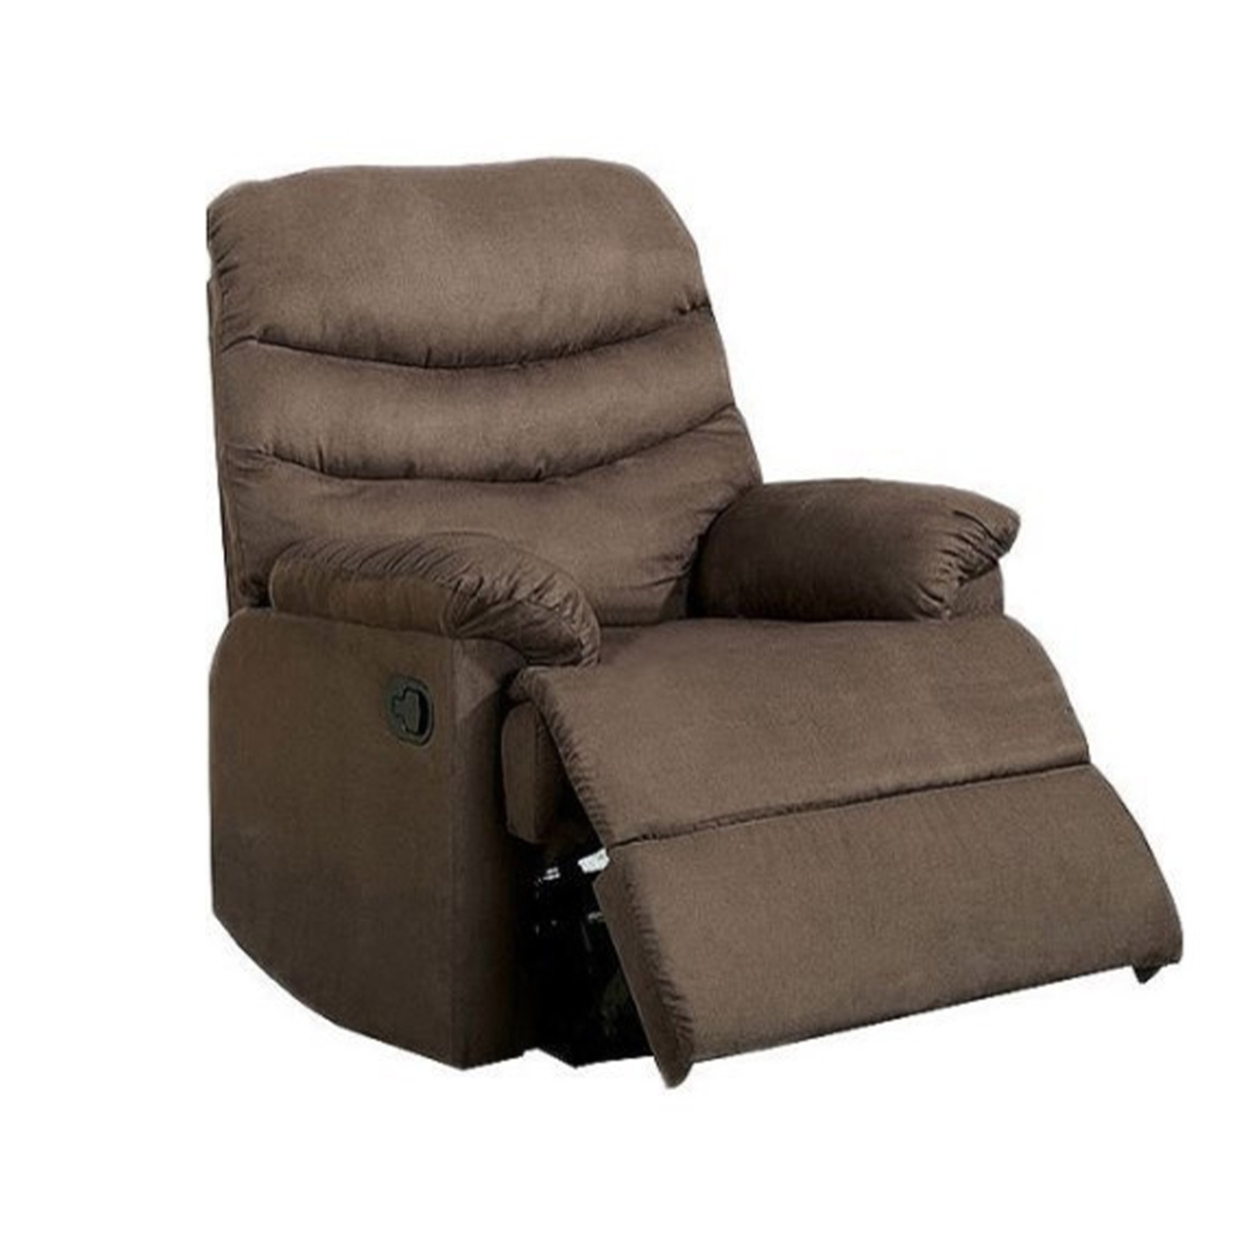 Plesant Valley Transitional Recliner Chair With Microfiber, Brown- Saltoro Sherpi